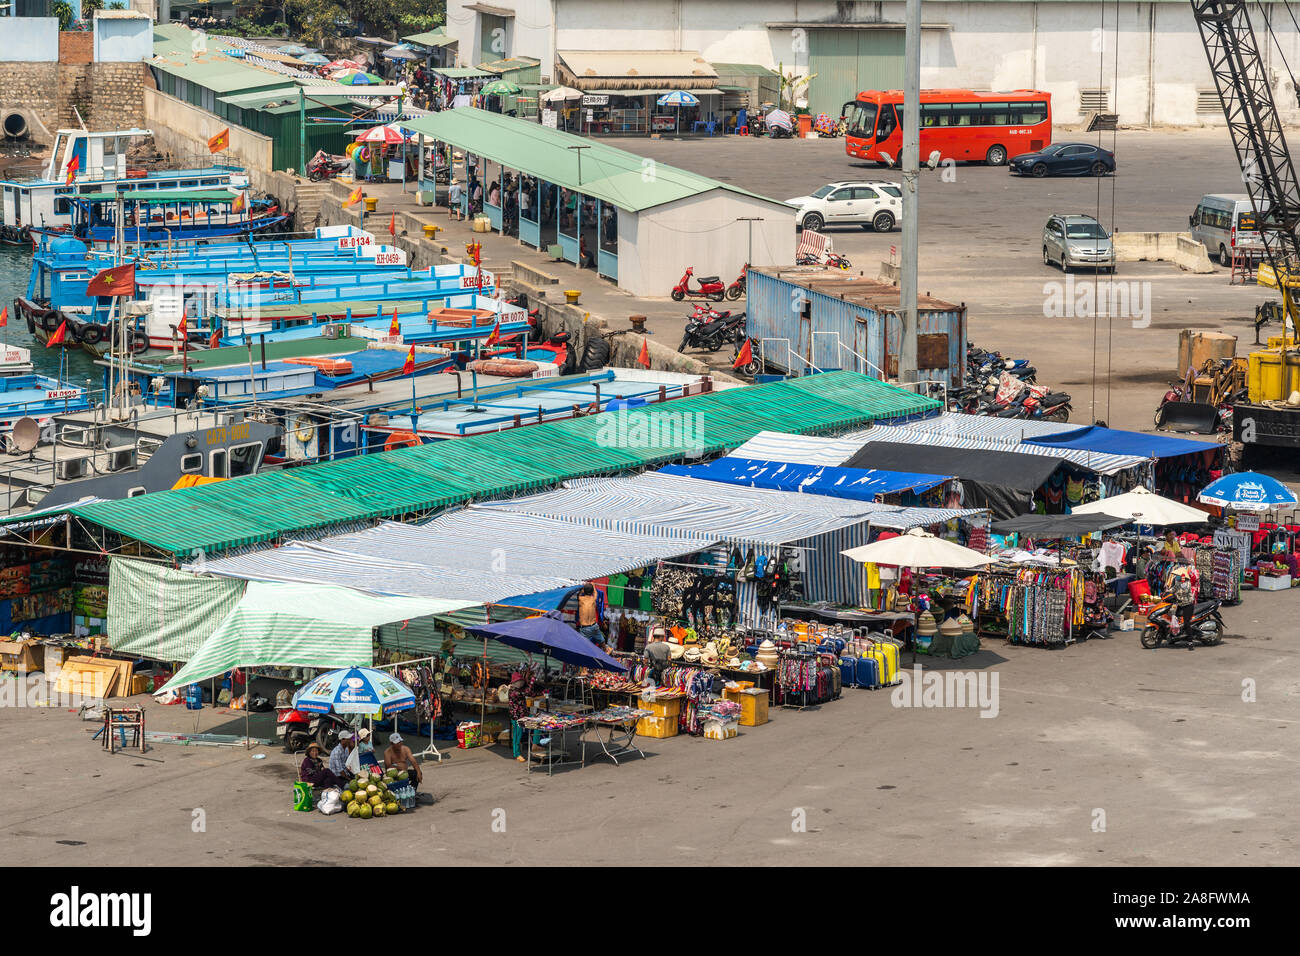 Nha Trang, Vietnam - March 11, 2019: Daily market booths under colored awnings adjacent to ferry landing with several boats at port. People, cars and Stock Photo